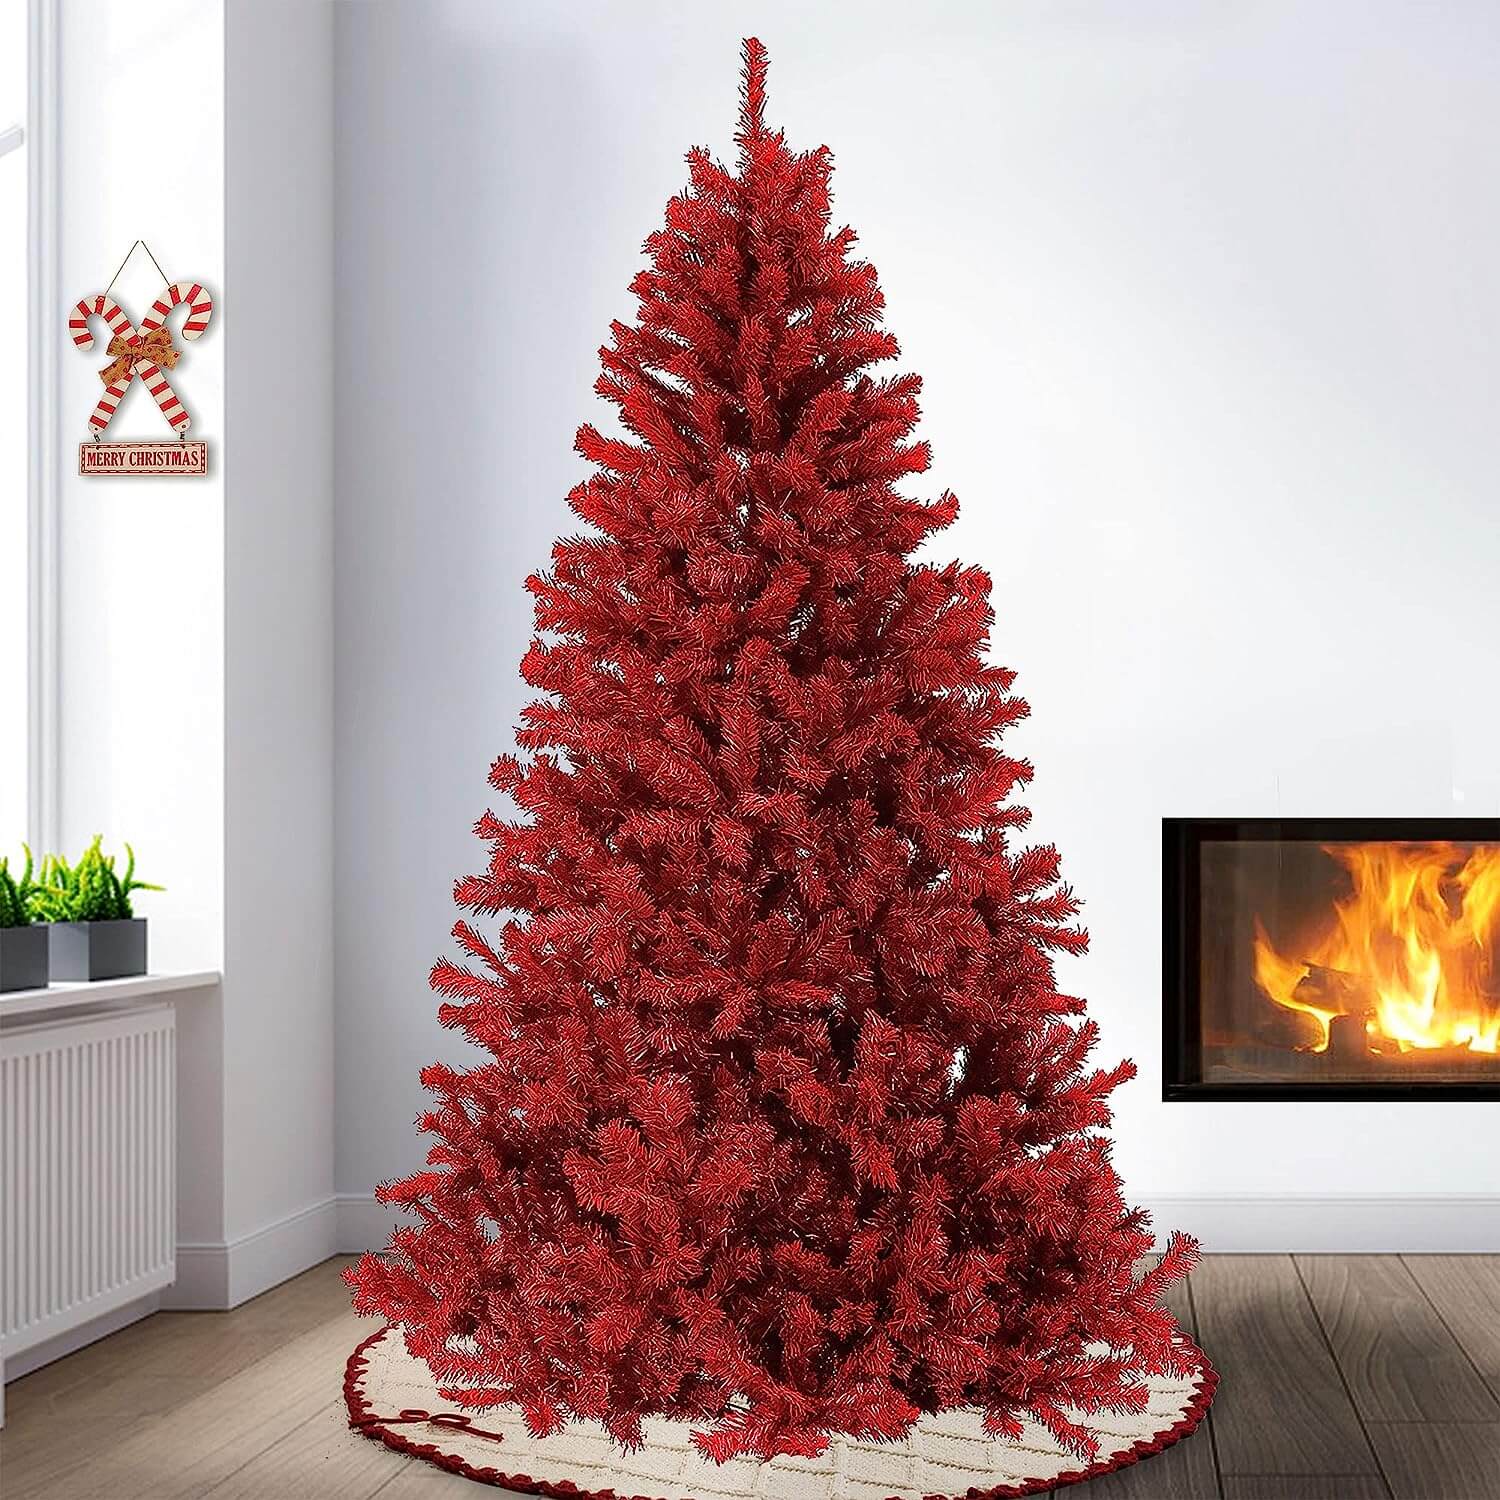 Red Christmas Trees: Decorating with Festive Holiday Cheer!